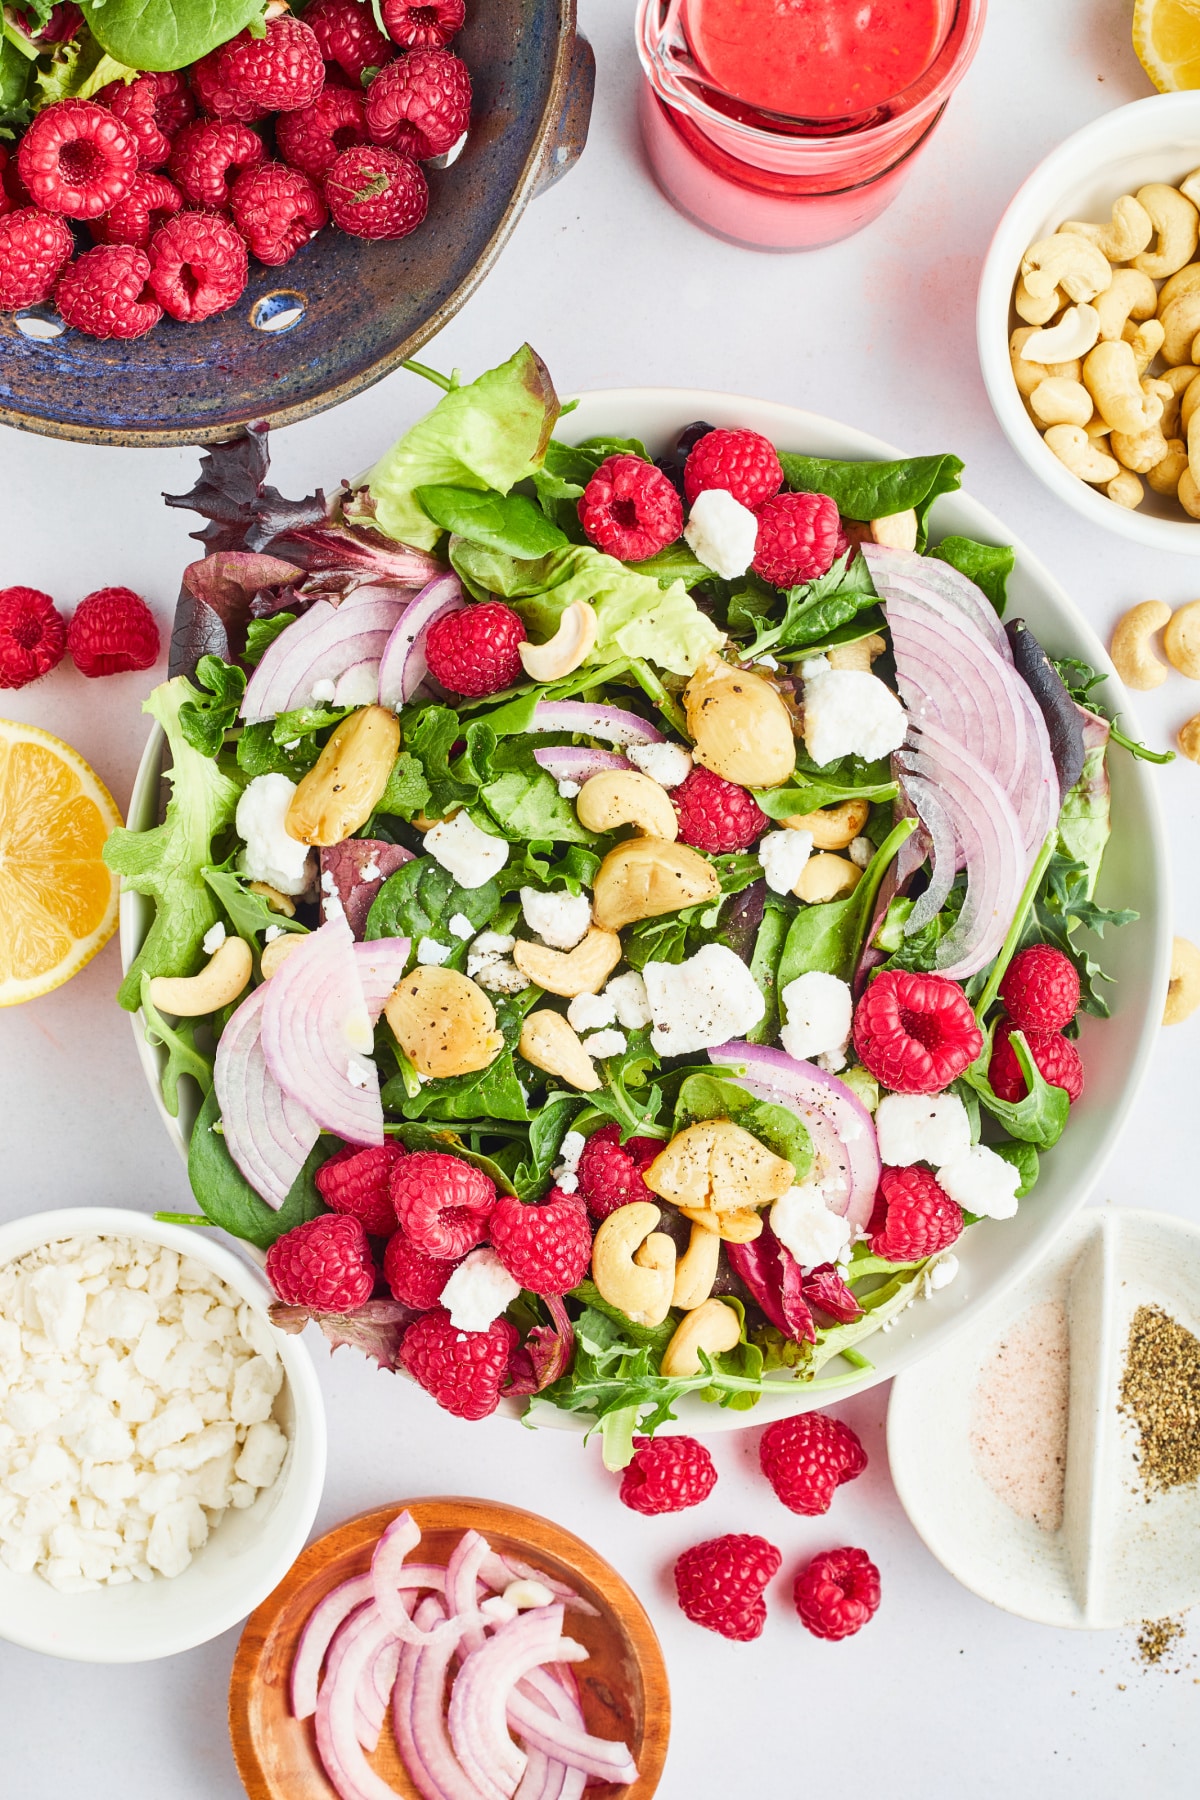 An overhead view of a mixed greens salad with roasted garlic and fresh raspberries. The salad is served in a large white bowl and sitting on a white surface. A rustic blue colander holds more greens and berries and sits next to the salad. Small bowls hold sliced red onion, cashews, and vegan goat cheese.